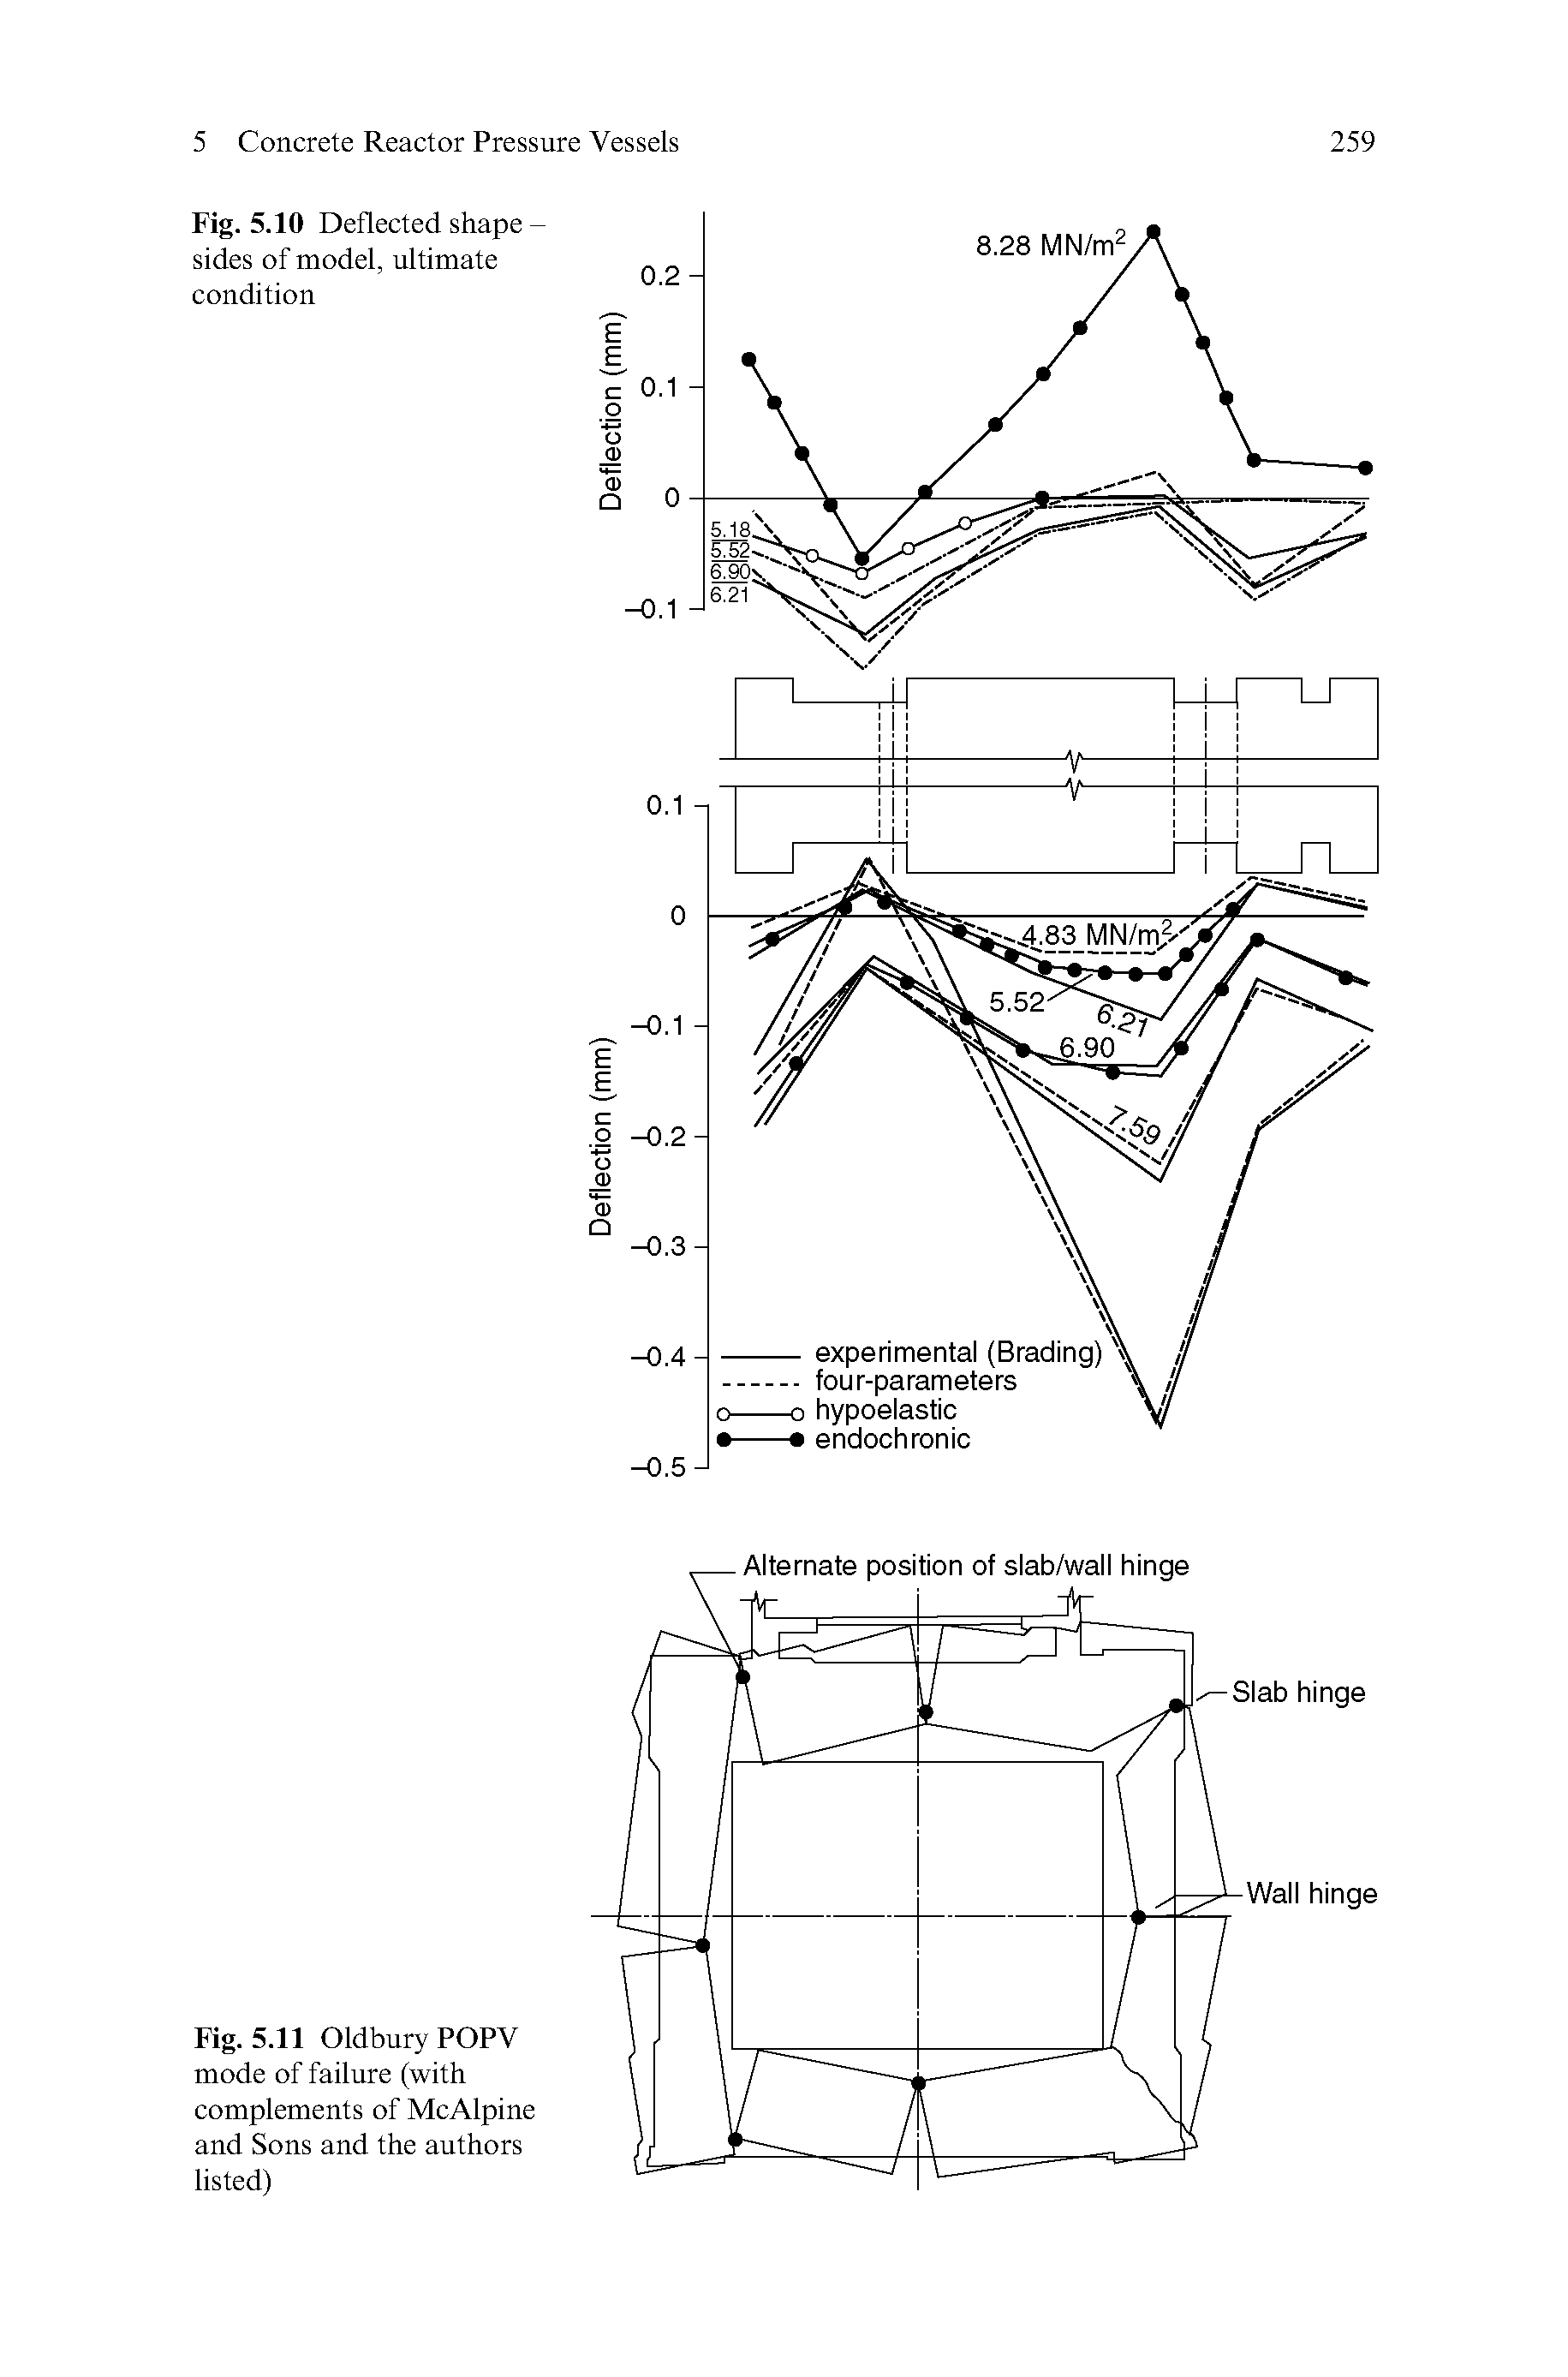 Fig. 5.10 Deflected shape -sides of model, ultimate condition...